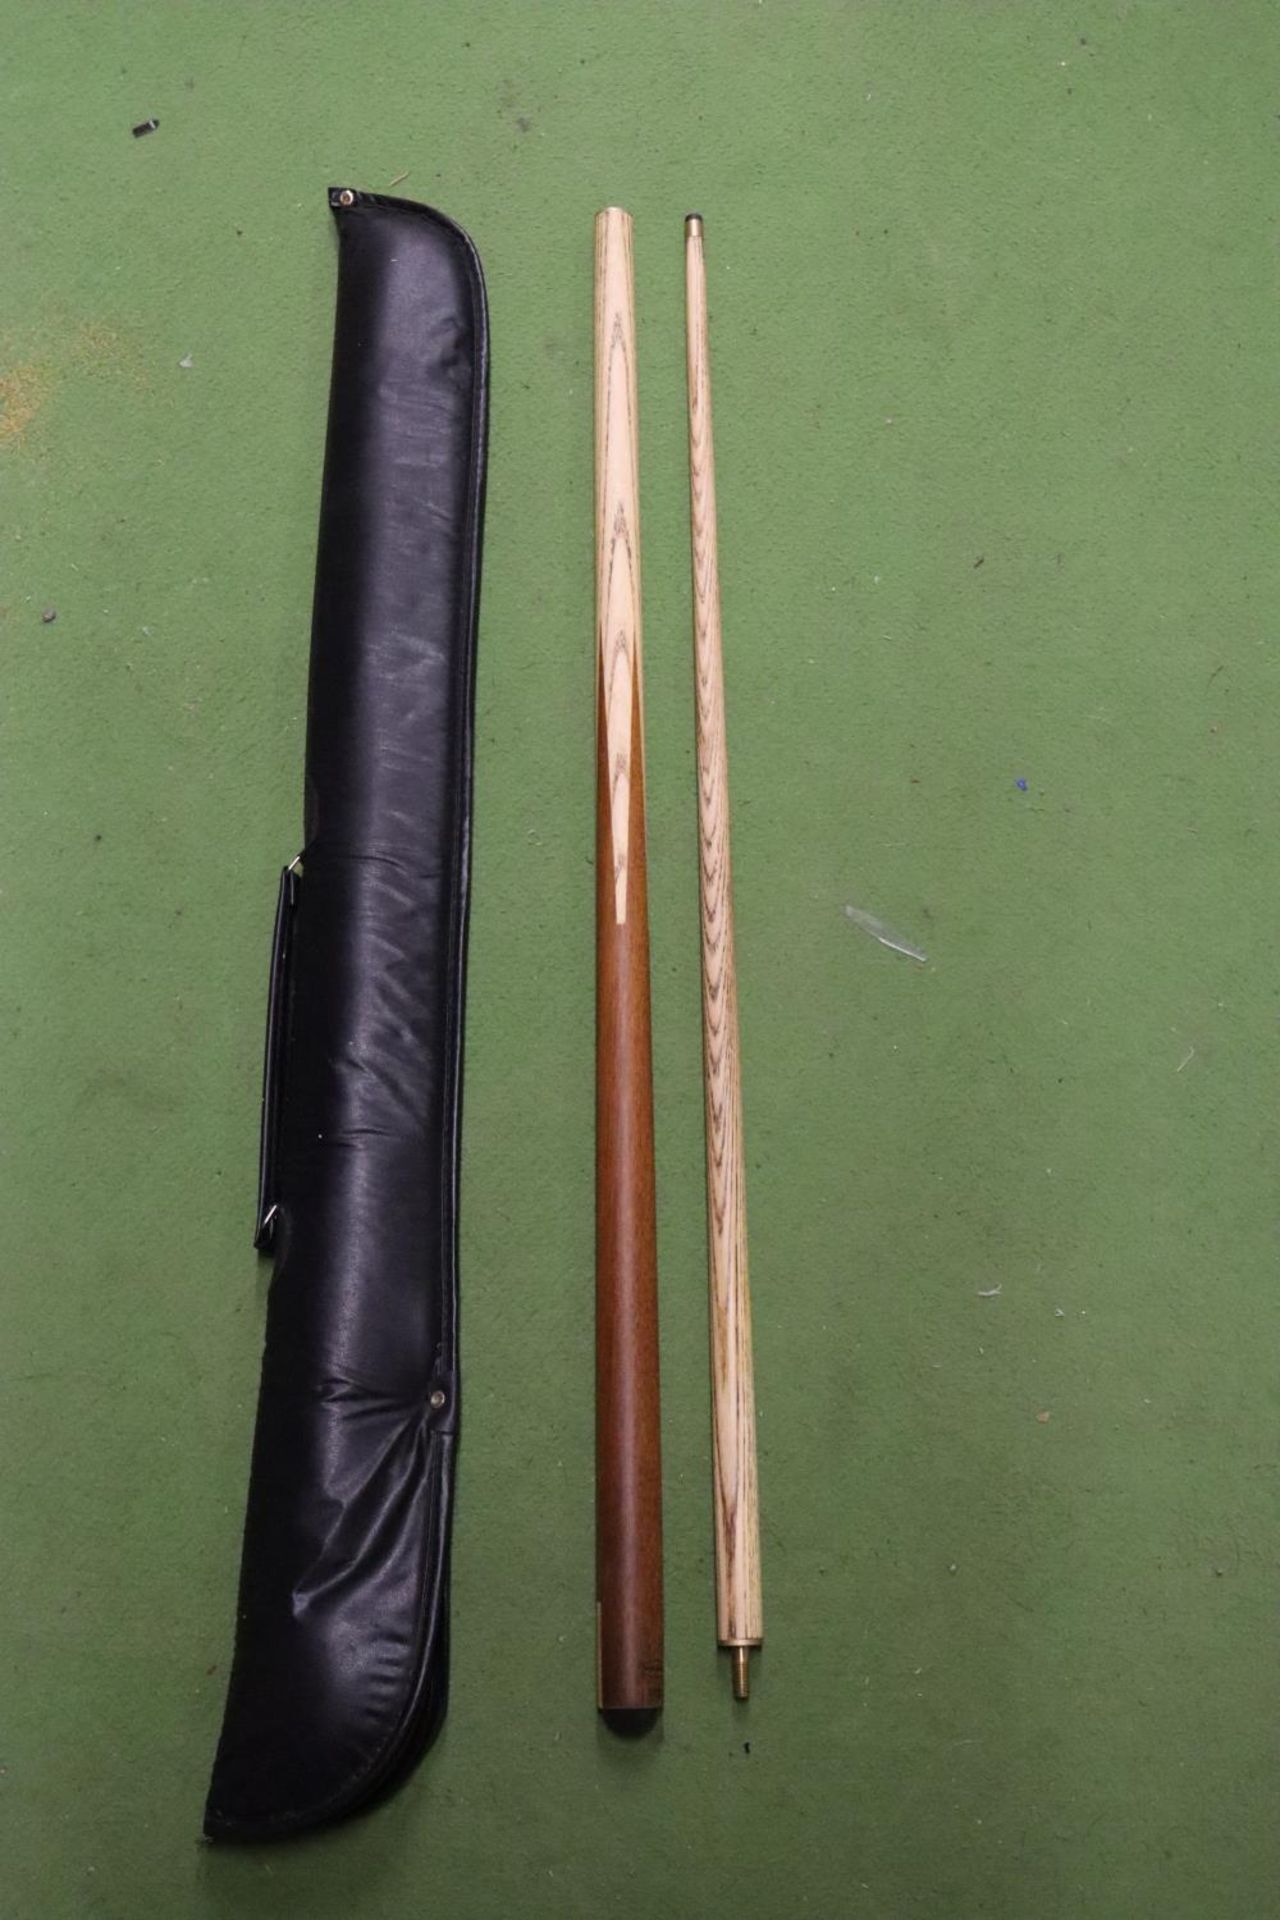 A SNOOKER CUE IN A SOFT CASE - Image 2 of 6